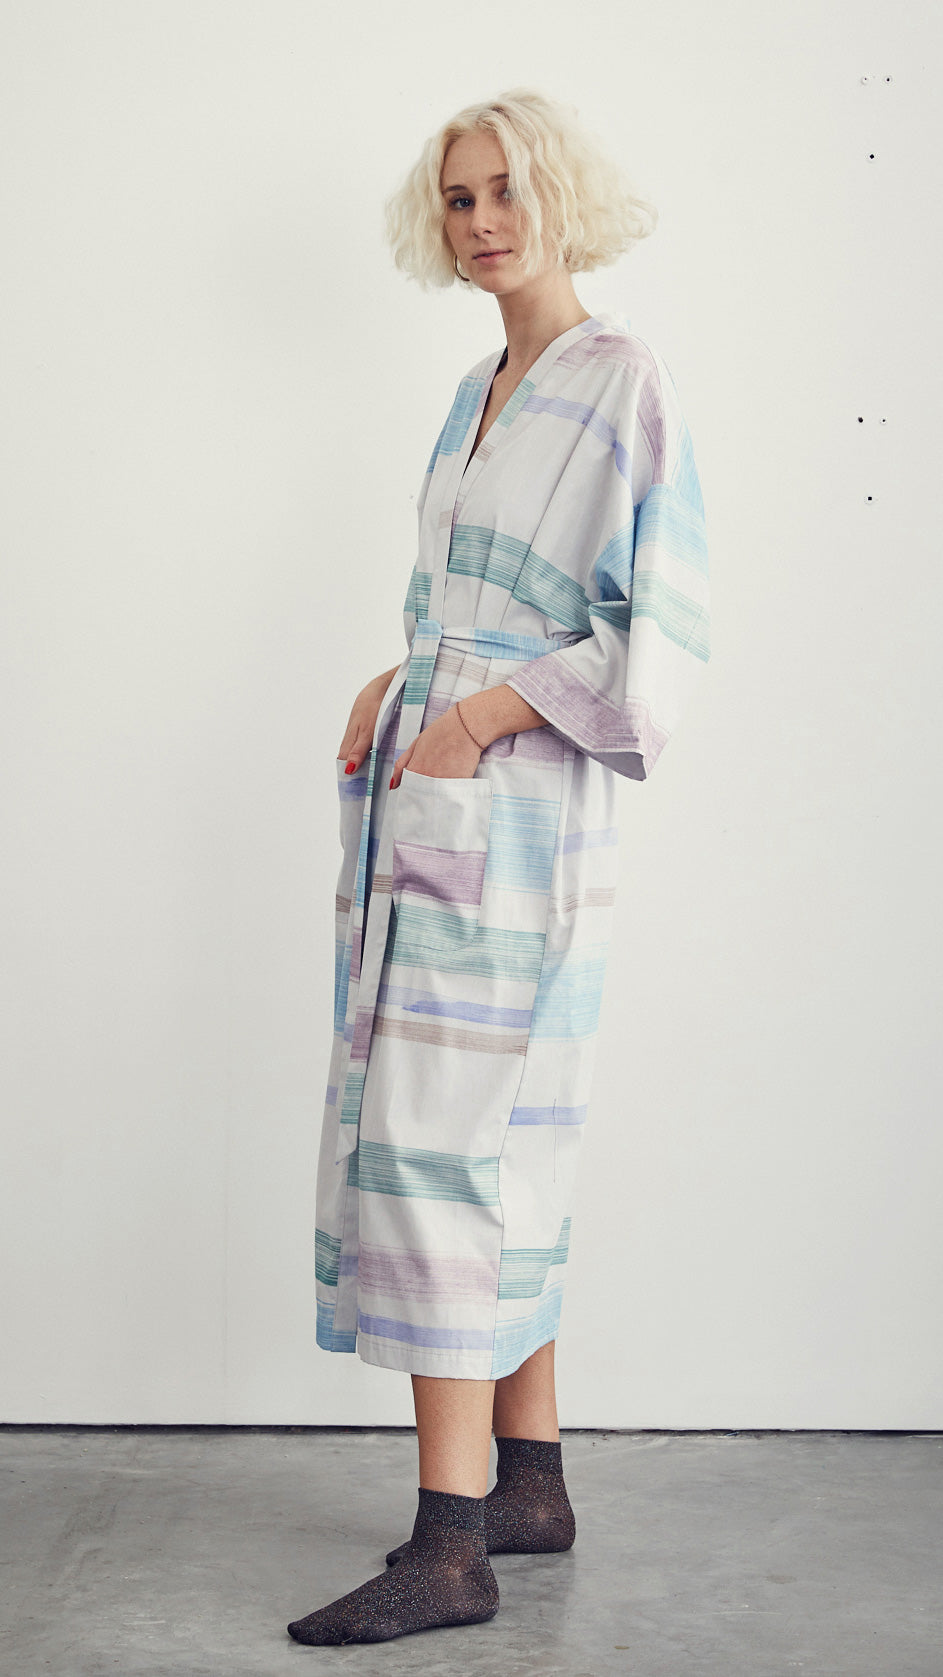 cardinal gift shop mid-weight cotton robe in stripe pattern on a woman